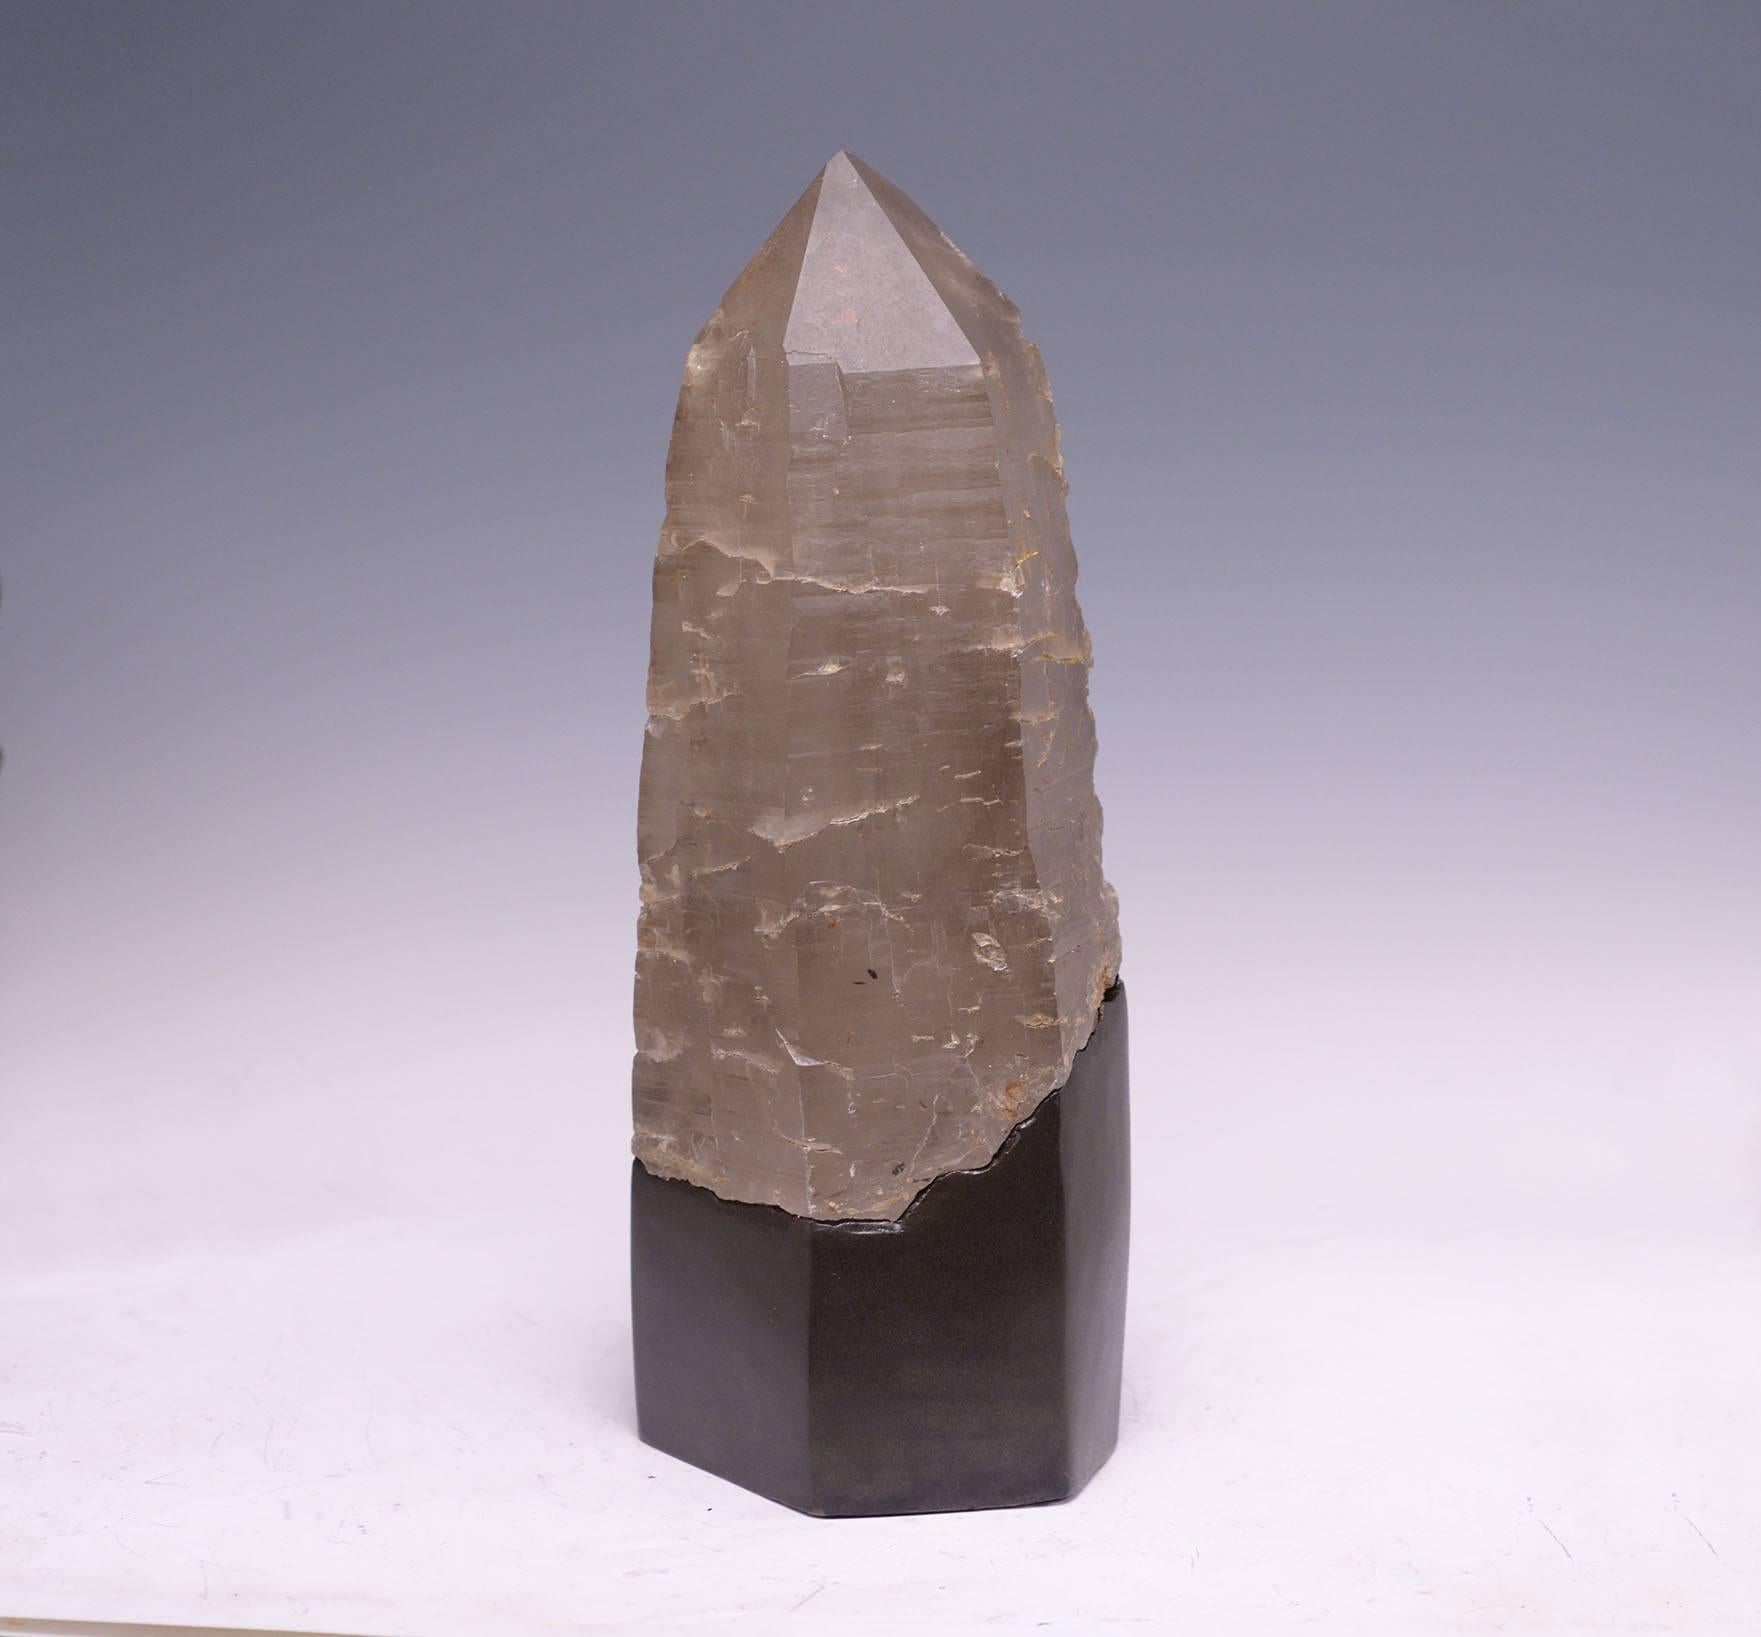 A beautiful grey rock crystal quartz obelisk with painted wooden base.
